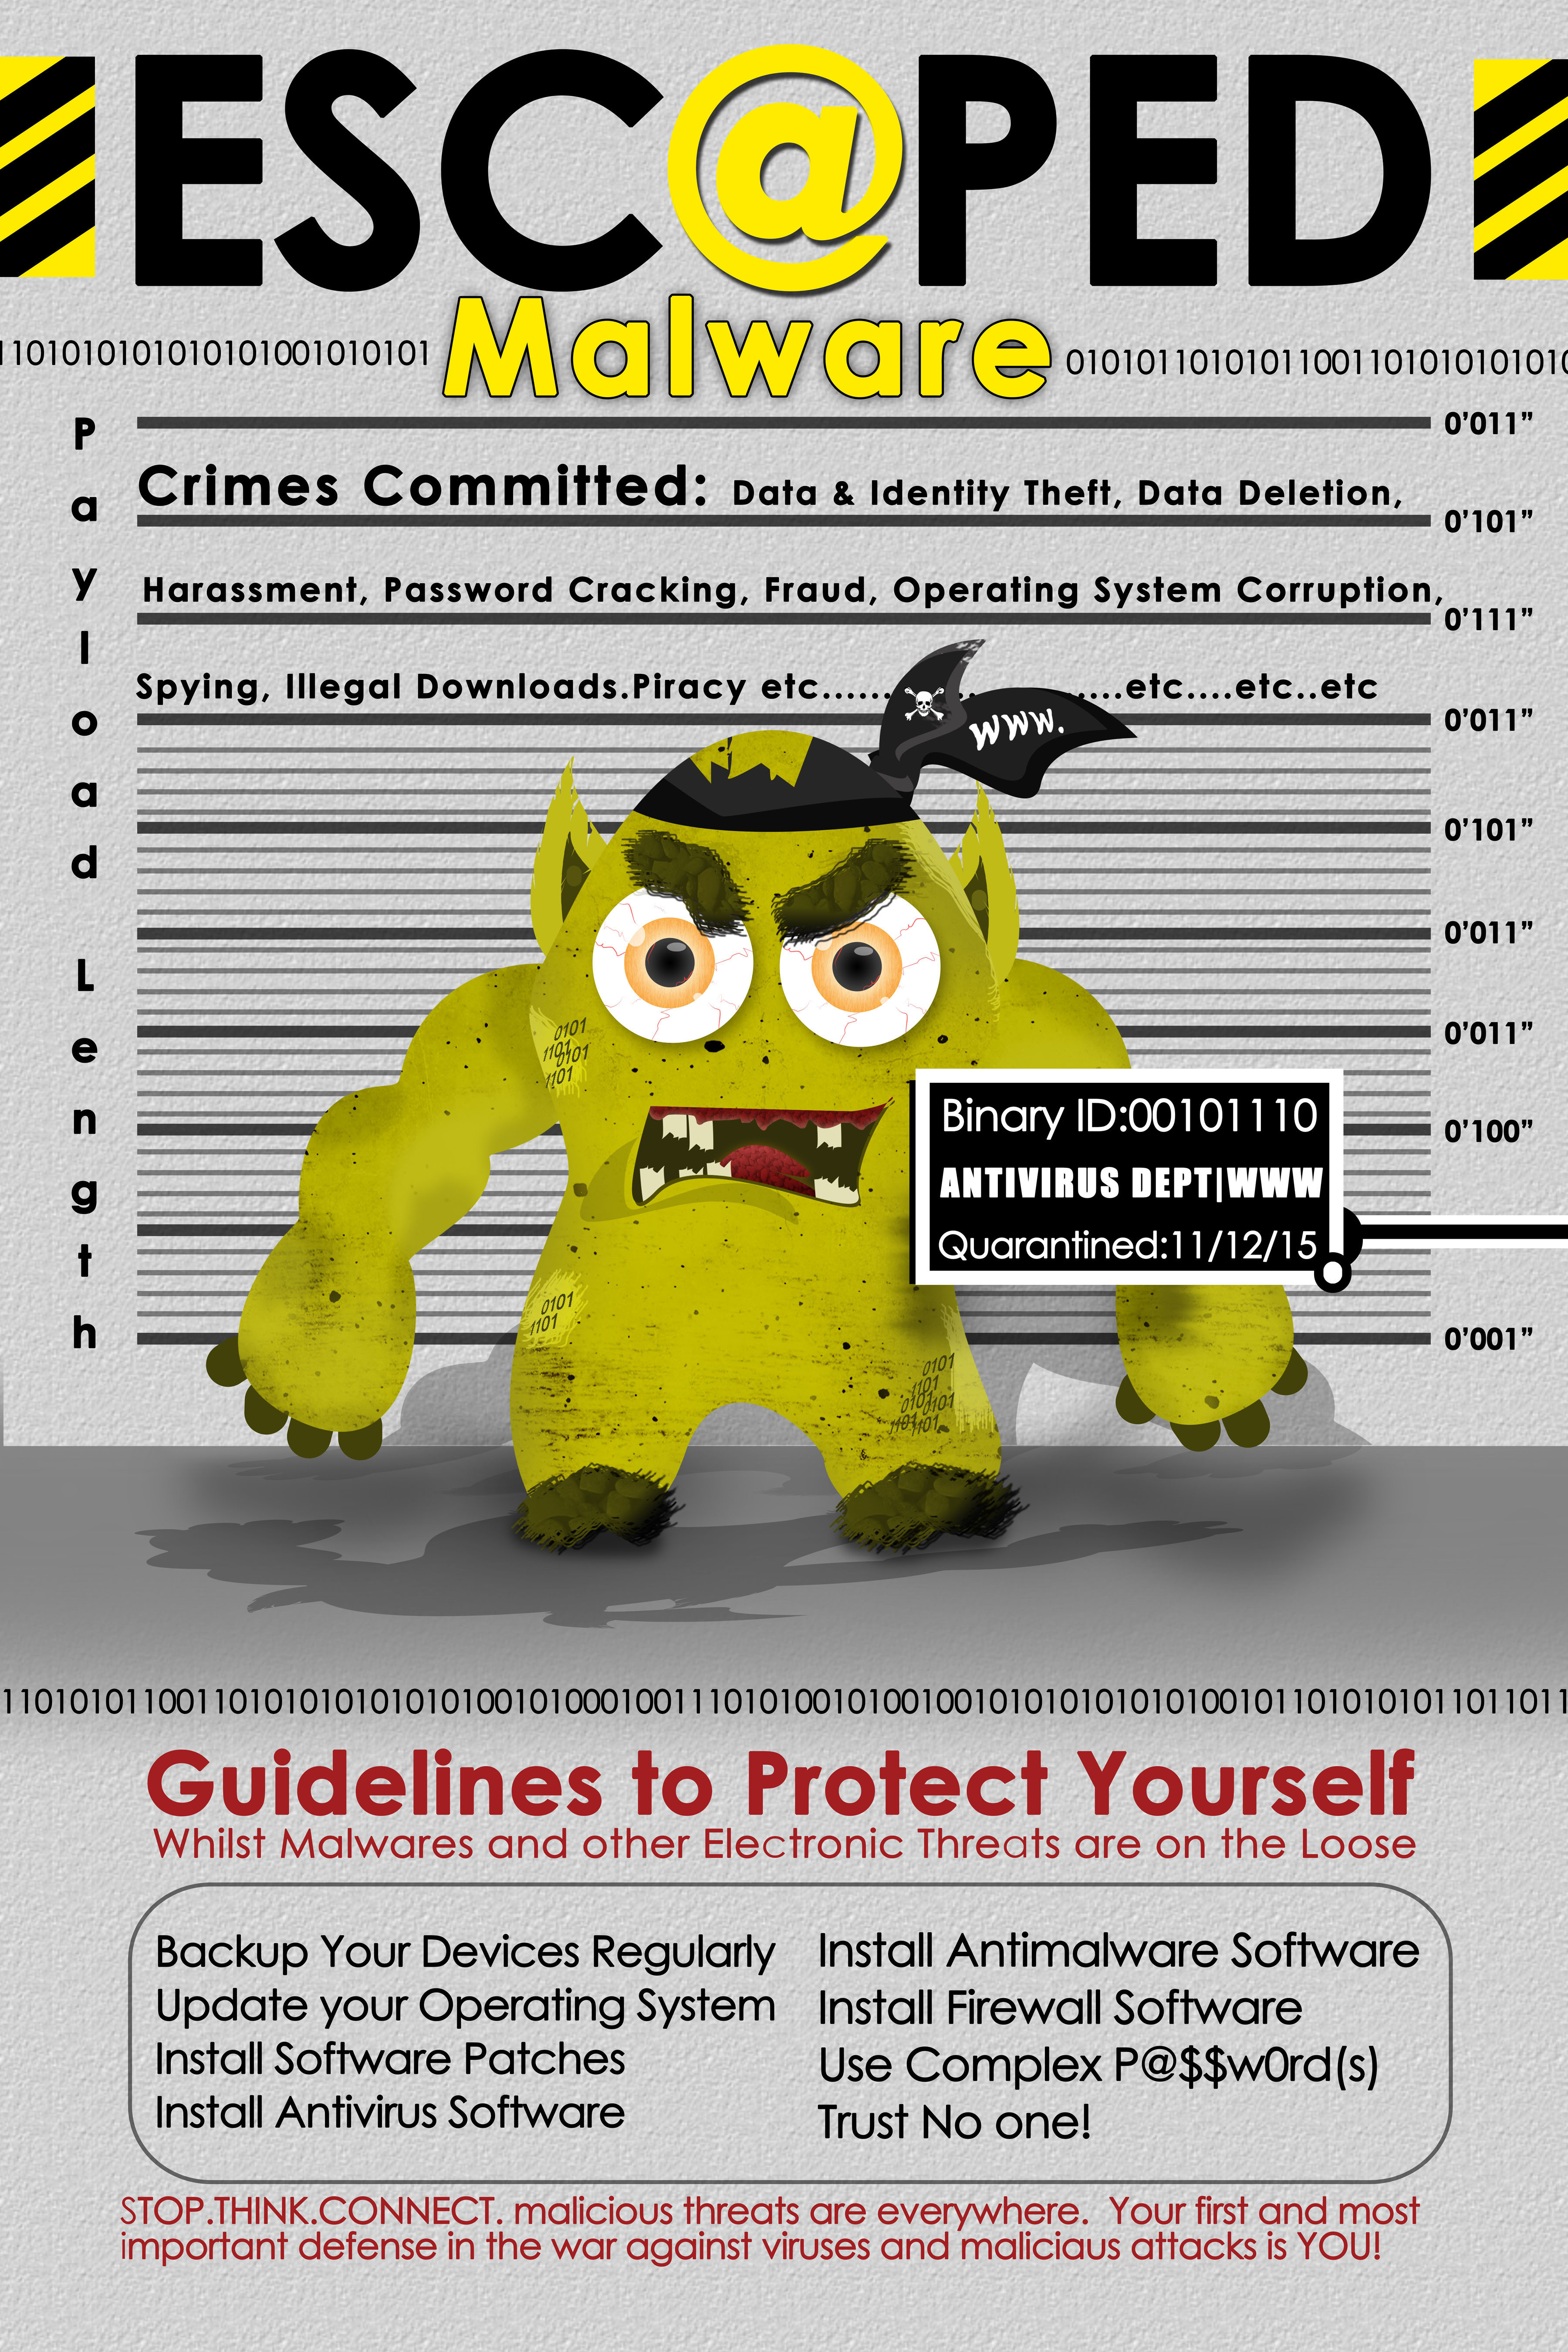 Guidelines to Protect Yourself Whilst Malwares and other Electronic Threats are on the Loose - Backup Your Devices Regularly - Install Antimalware Software - Update your Operating System - Install Firewall Software - Install Software Patches - Use Complex P@$$wOrd(s) - Install Antivirus Software - Trust No one!  STOP.THINK.CONNECT. Malicious threats are everywhere. Your first and most important defense in the war against viruses and malicious attacks is YOU!